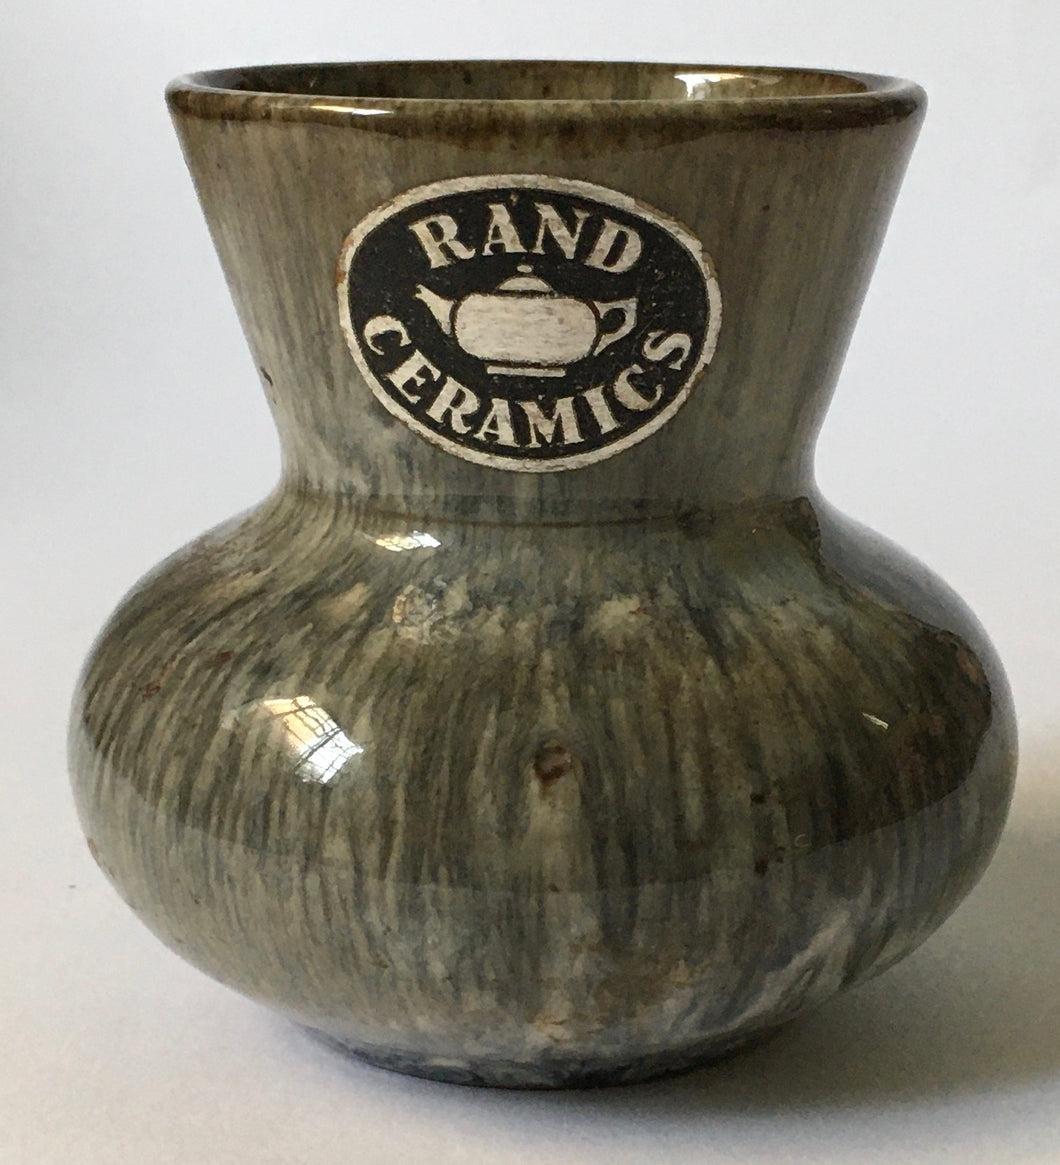 Rand Ceramics (South African) Pottery vase (Factory closed 1955) Impressed number 3426 #2